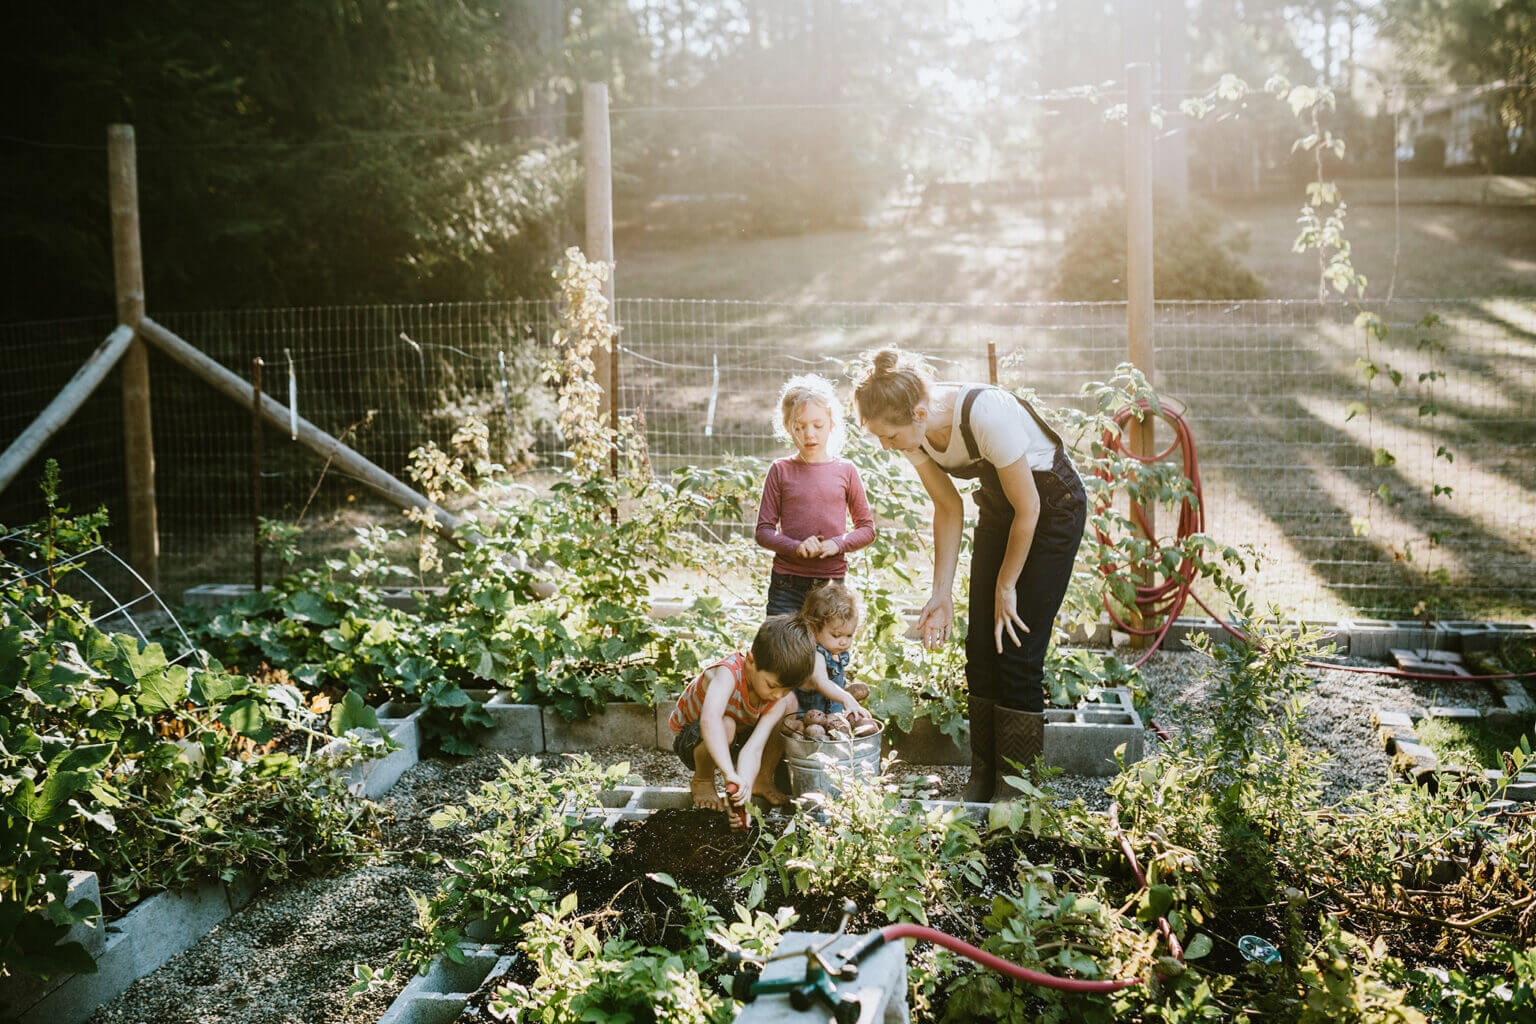 A woman and three young children work together in a backyard garden